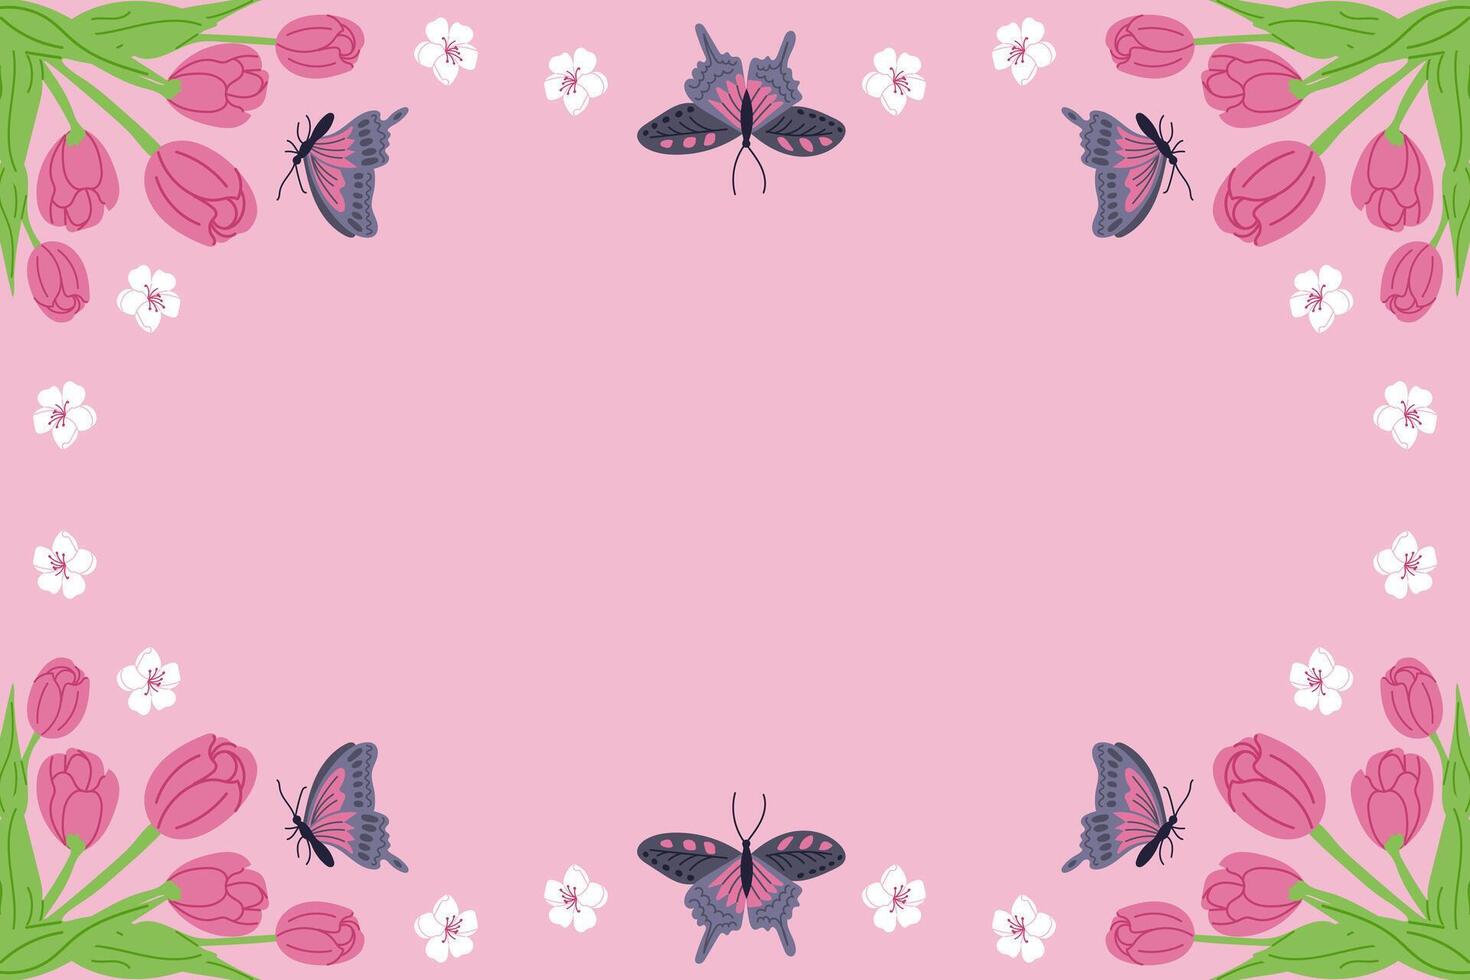 Horizontal background with spring flowers and butterflies. Frame template or design print with tulips and cherry blossom on pink background. Good for banner, background, social media graphics vector